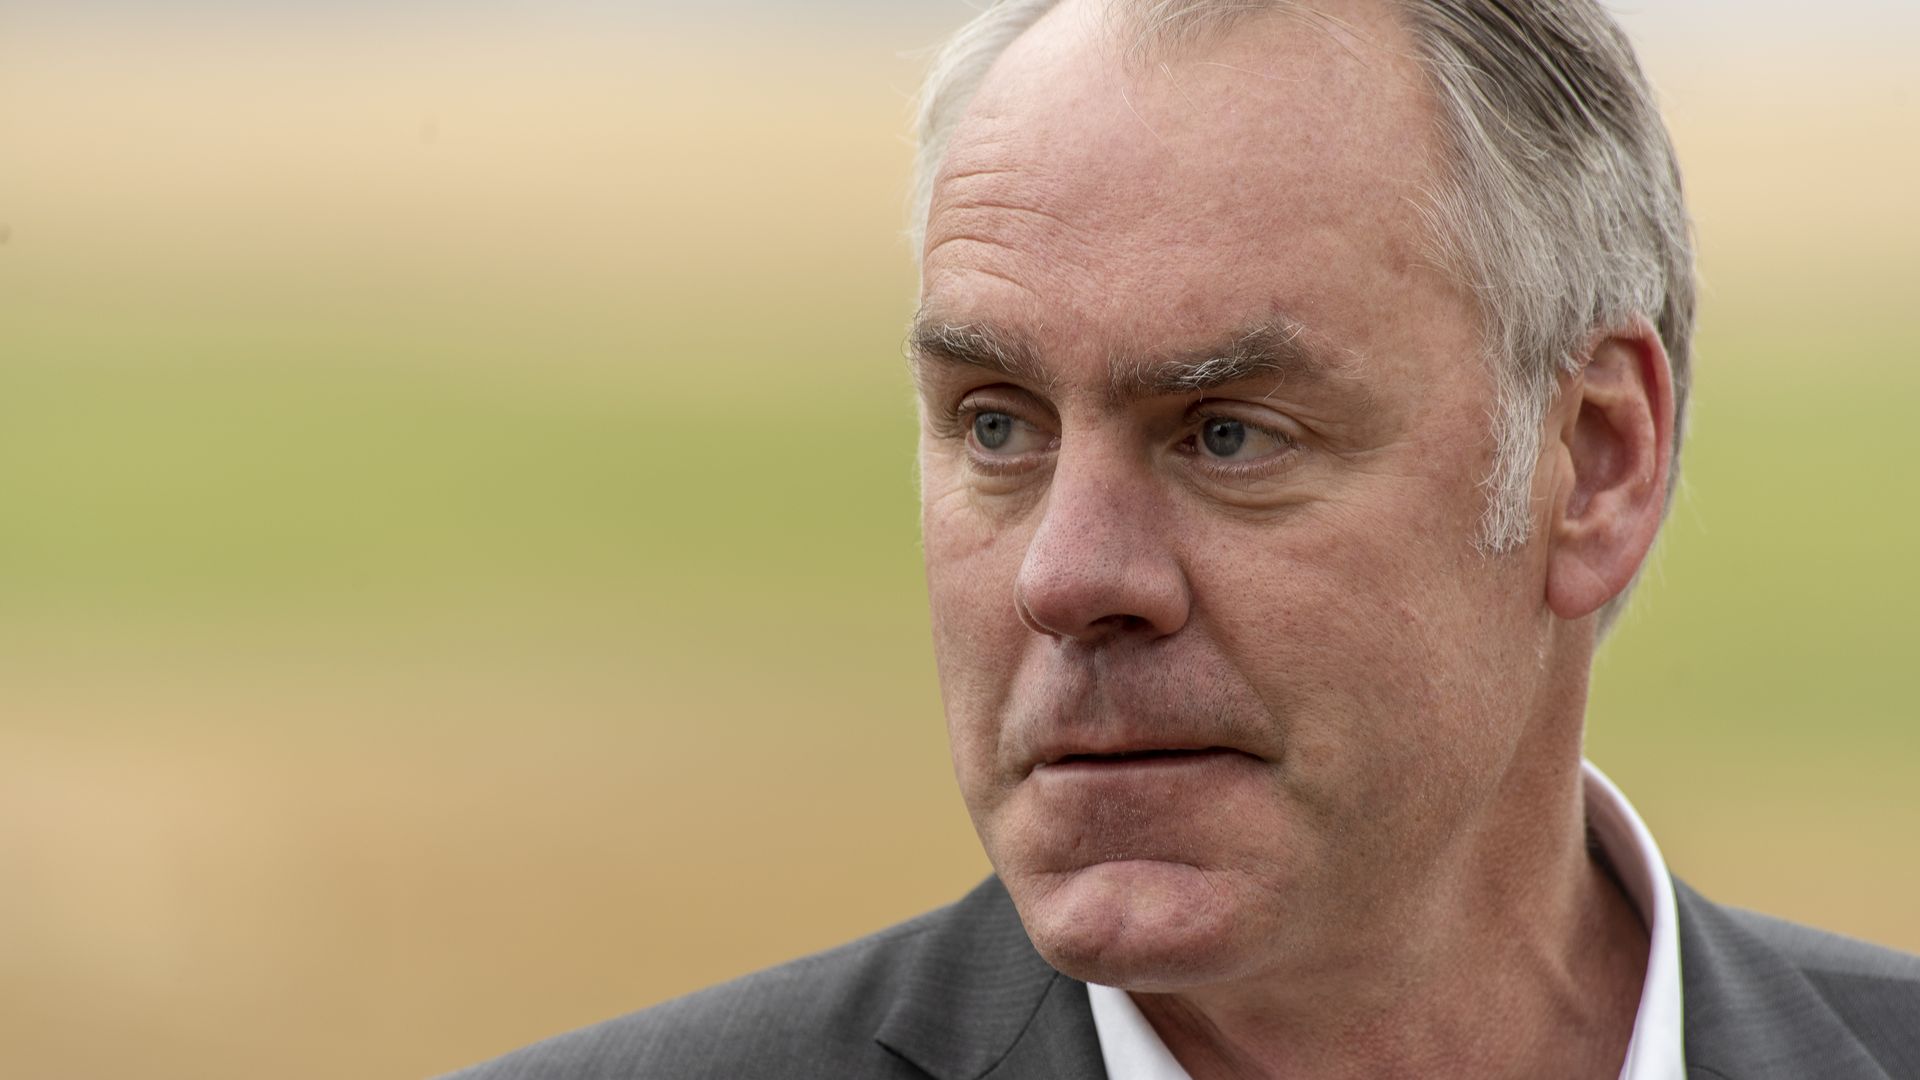 Zinke looks to his right.